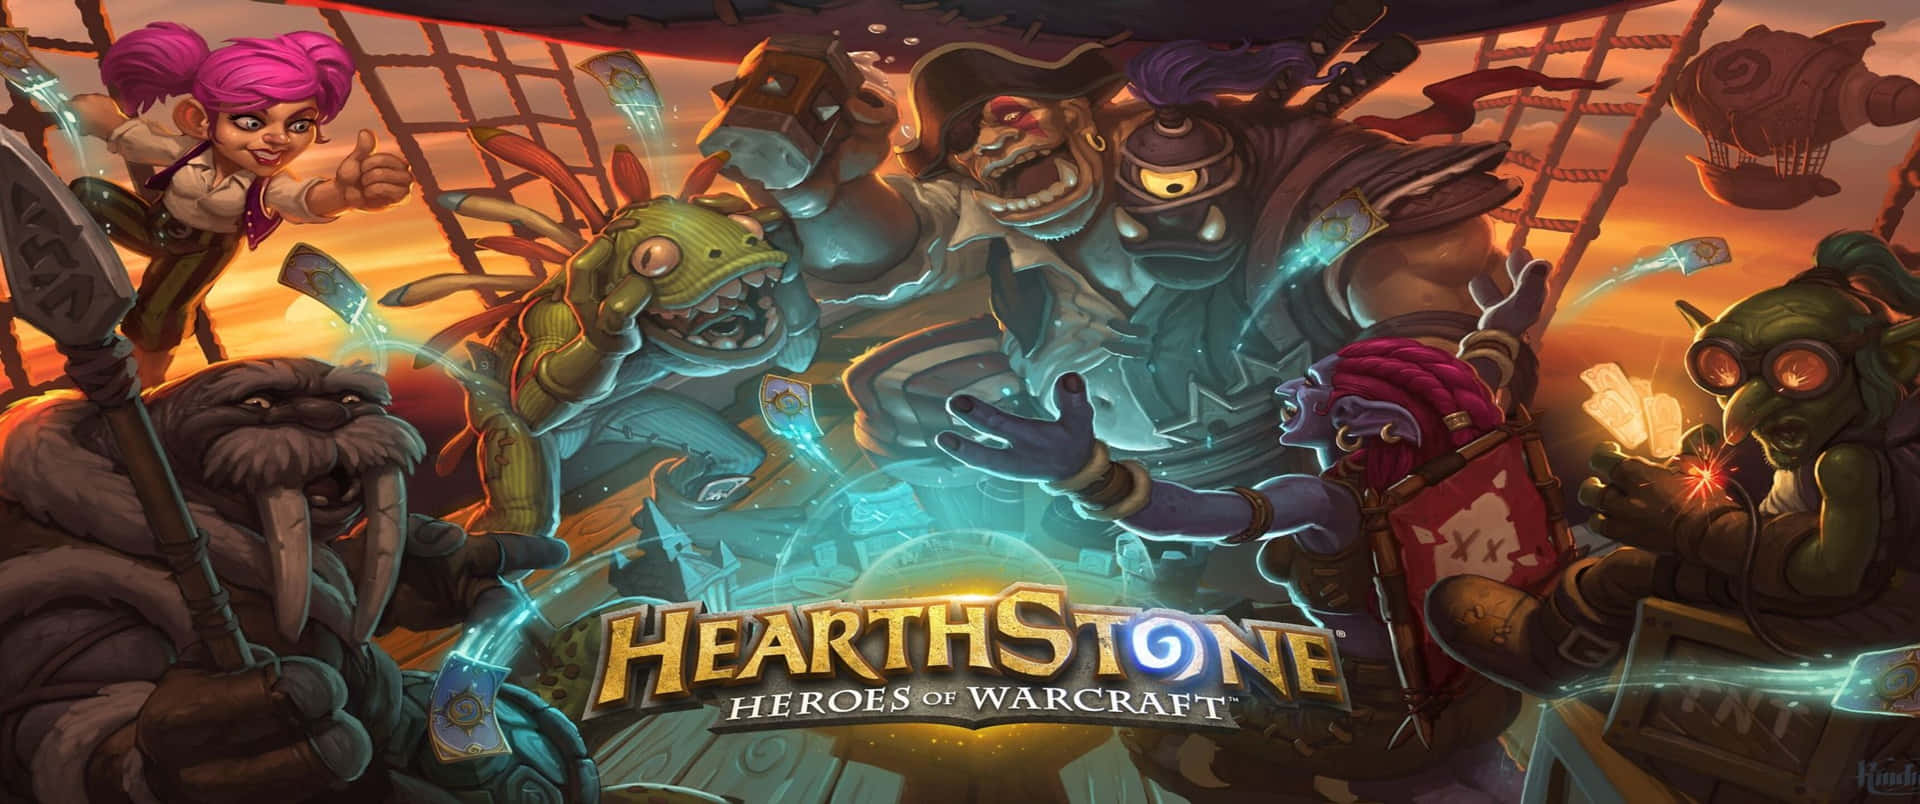 Check Out This Spectacular Hearthstone Wallpaper in 3440x1440p!